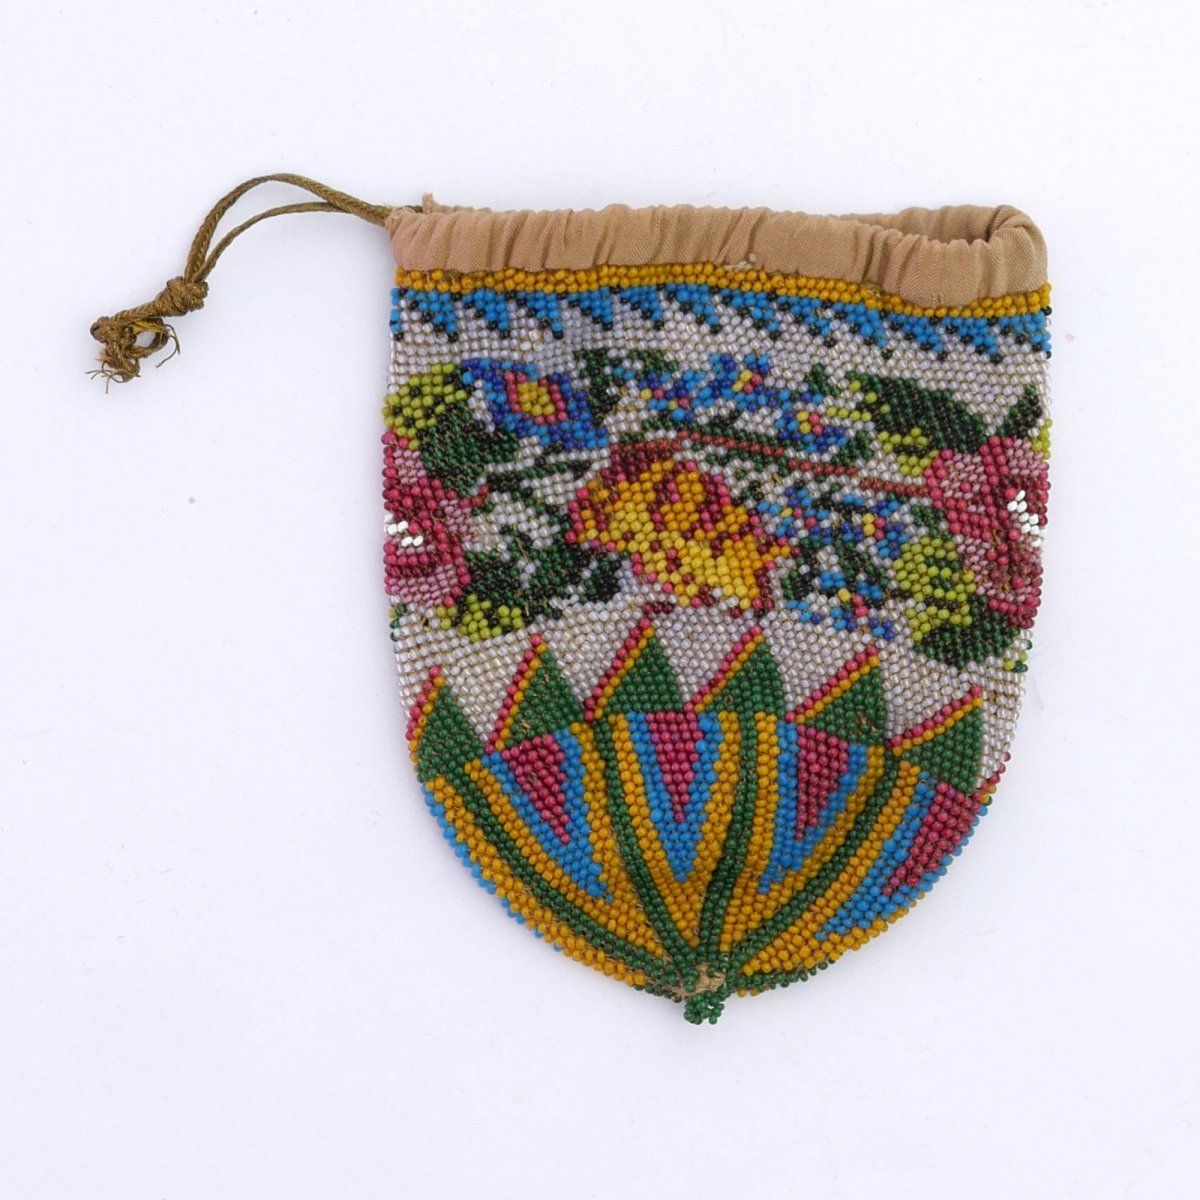 Null Pouch with floral border, 2nd half of the 19th century, H. 10 x 8 cm. Knitt&hellip;